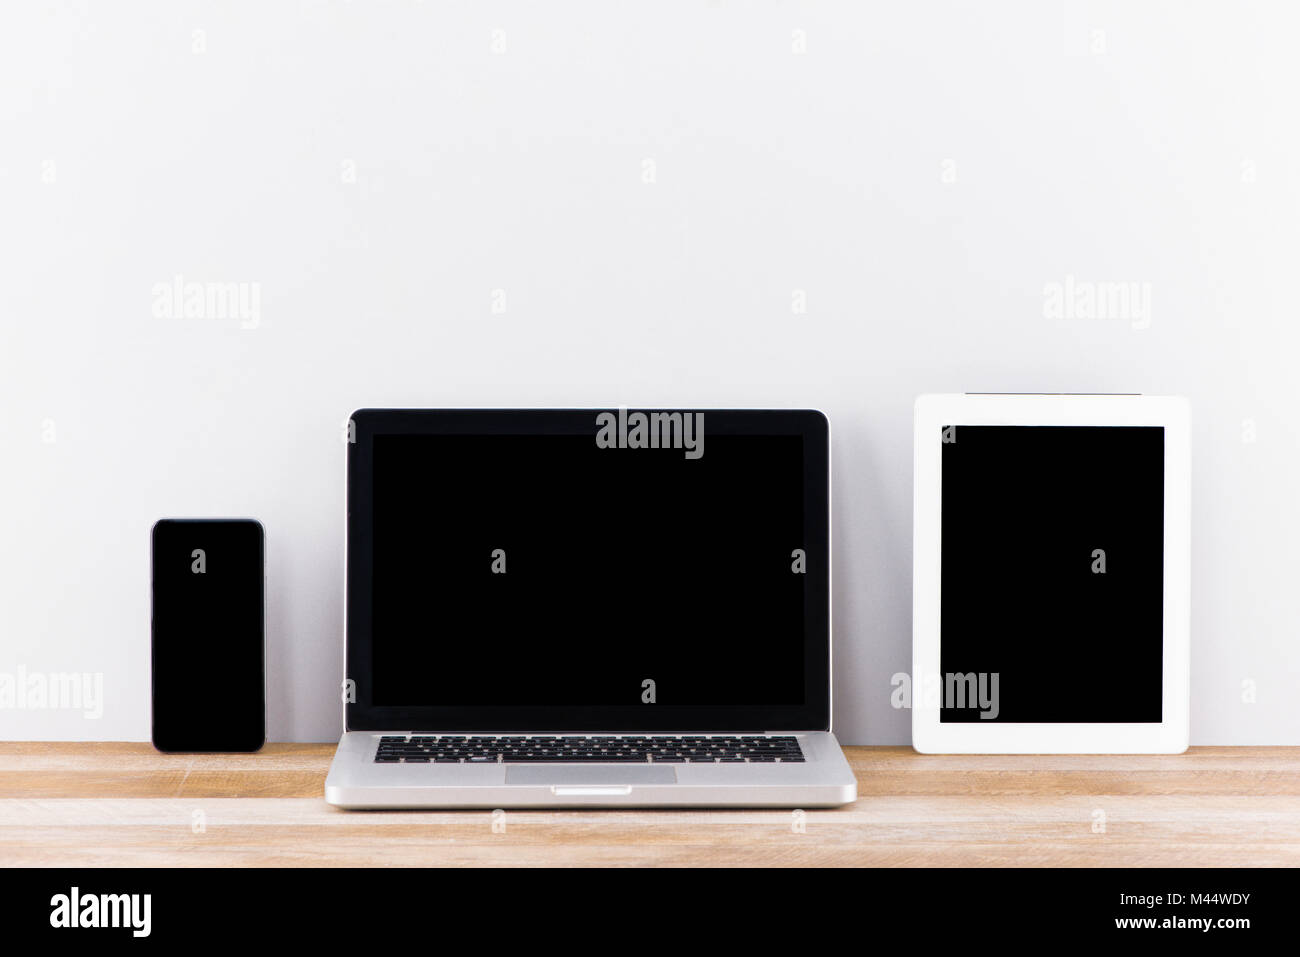 Creative web design agency presentation on multiple devices. Computer display, laptop, tablet, smart phone on white wooden desk. Brick white wall in b Stock Photo